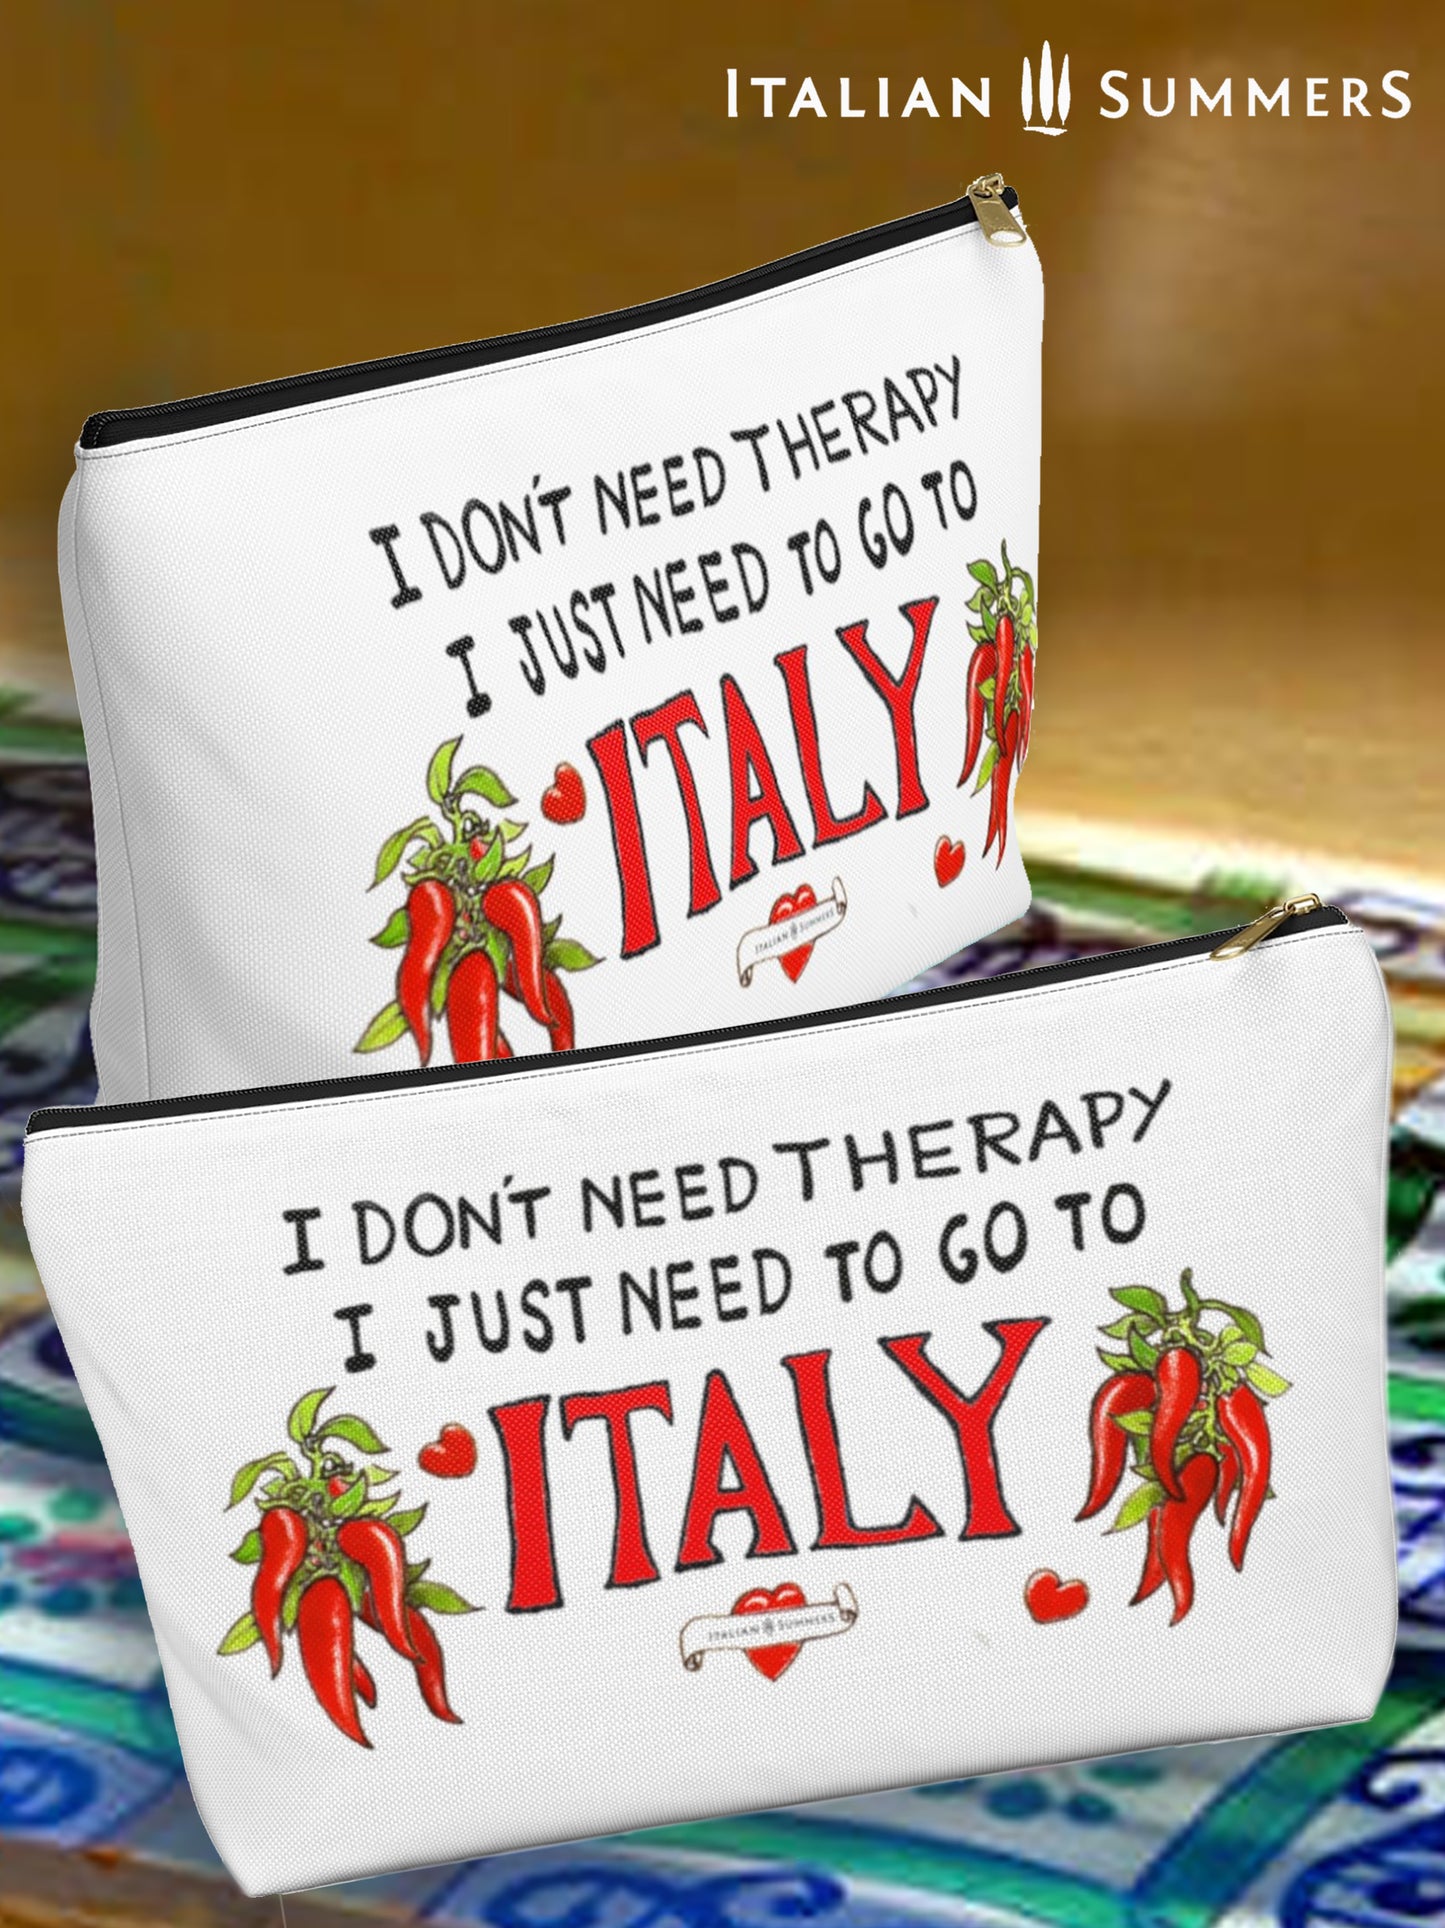 Italy inspired white canvas clutch with the quote I don't need therapy, I just need to go to Italy. The quote is in handwritten with the word Italy in red. On both sides of Italy there are bundles of peppers. The clutch has a black zipper that fits with the black text. Designed by Italian Summers 